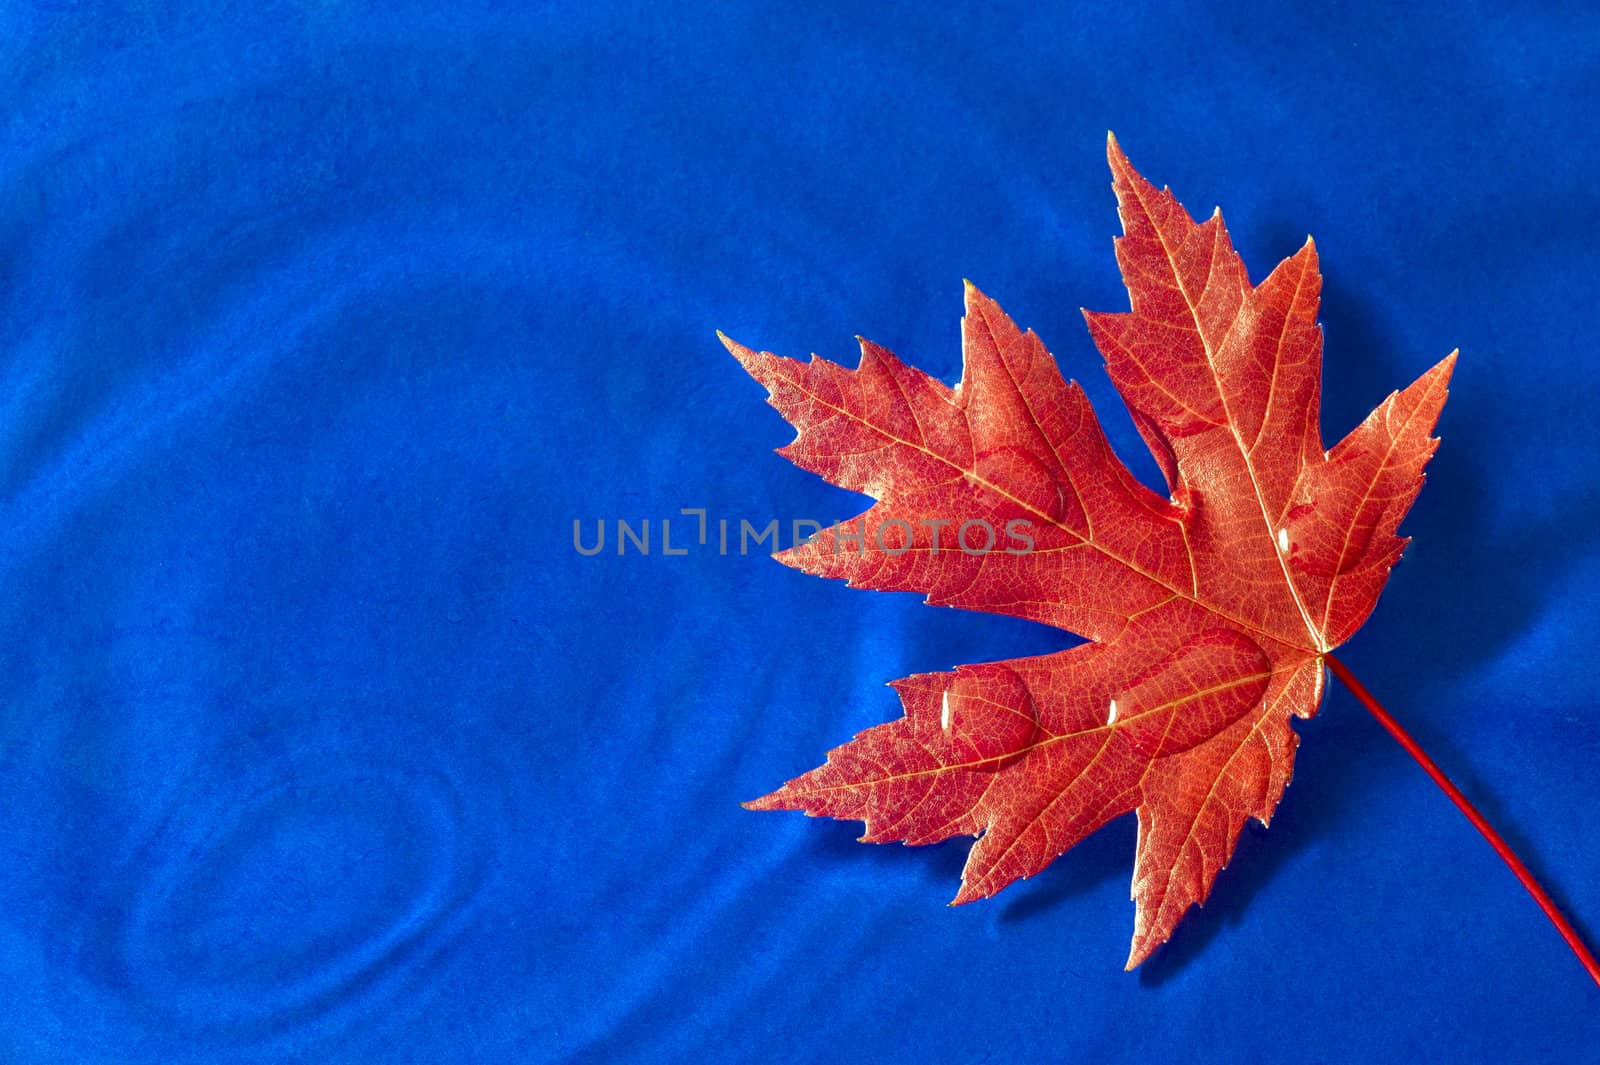 Beautiful Autumn Leaf Resting On Blue Water Background by stockbuster1